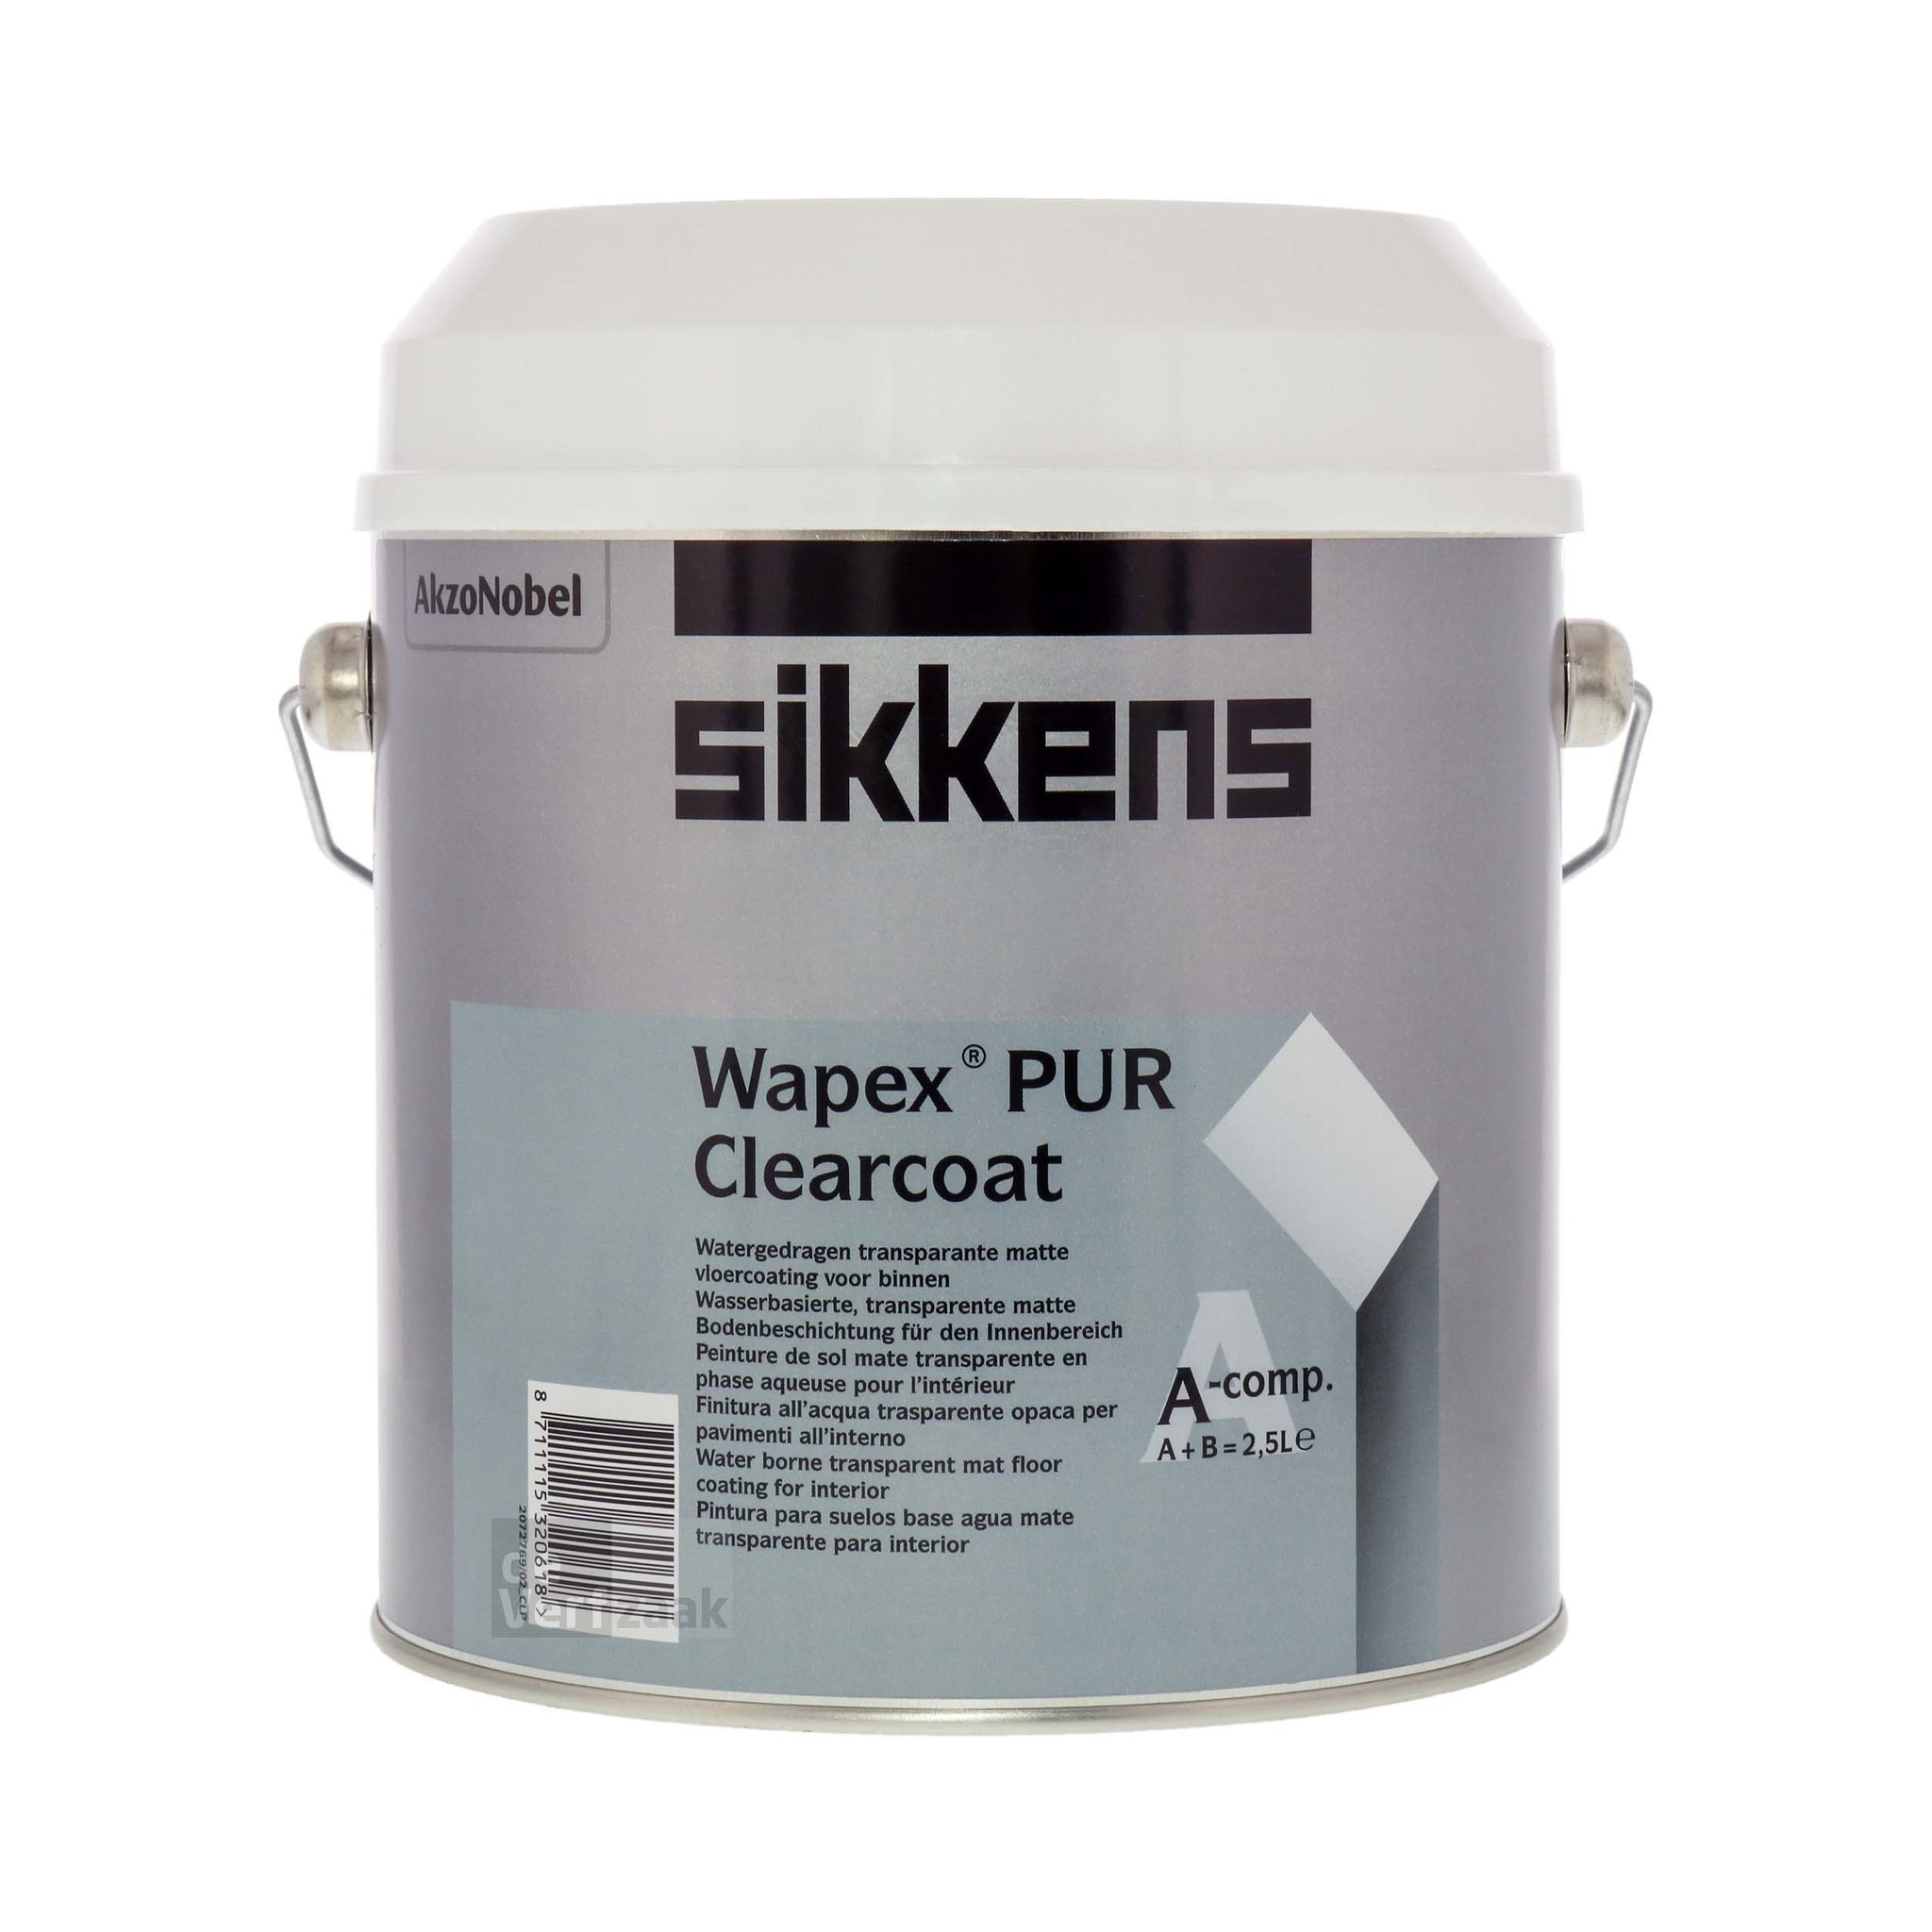 Sikkens Wapex PUR Clearcoat 2,5 liter